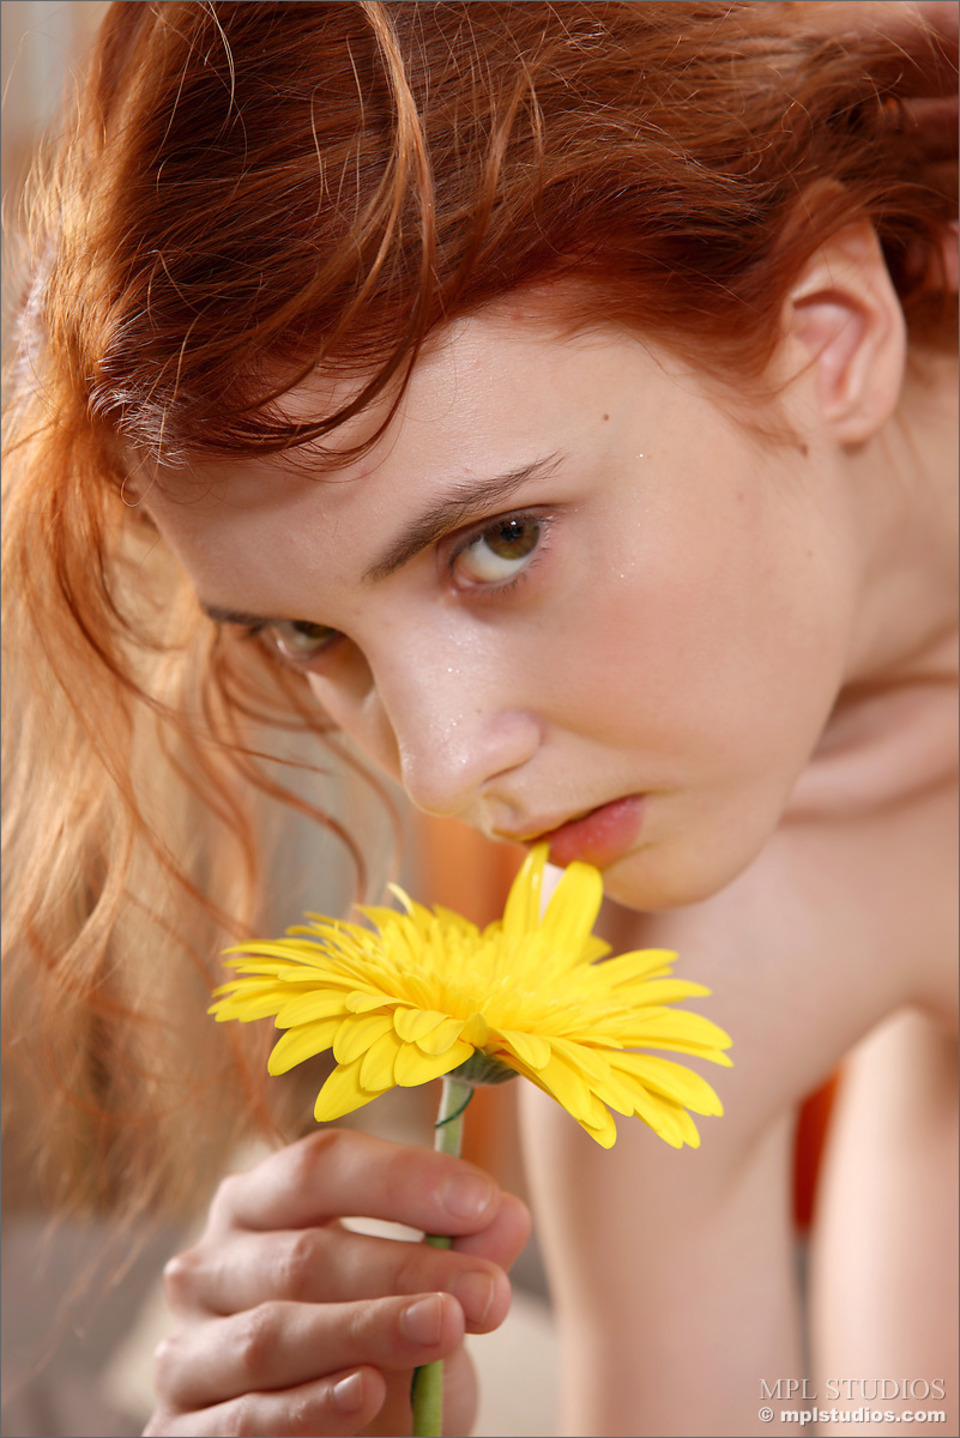 Of gingers and flowers